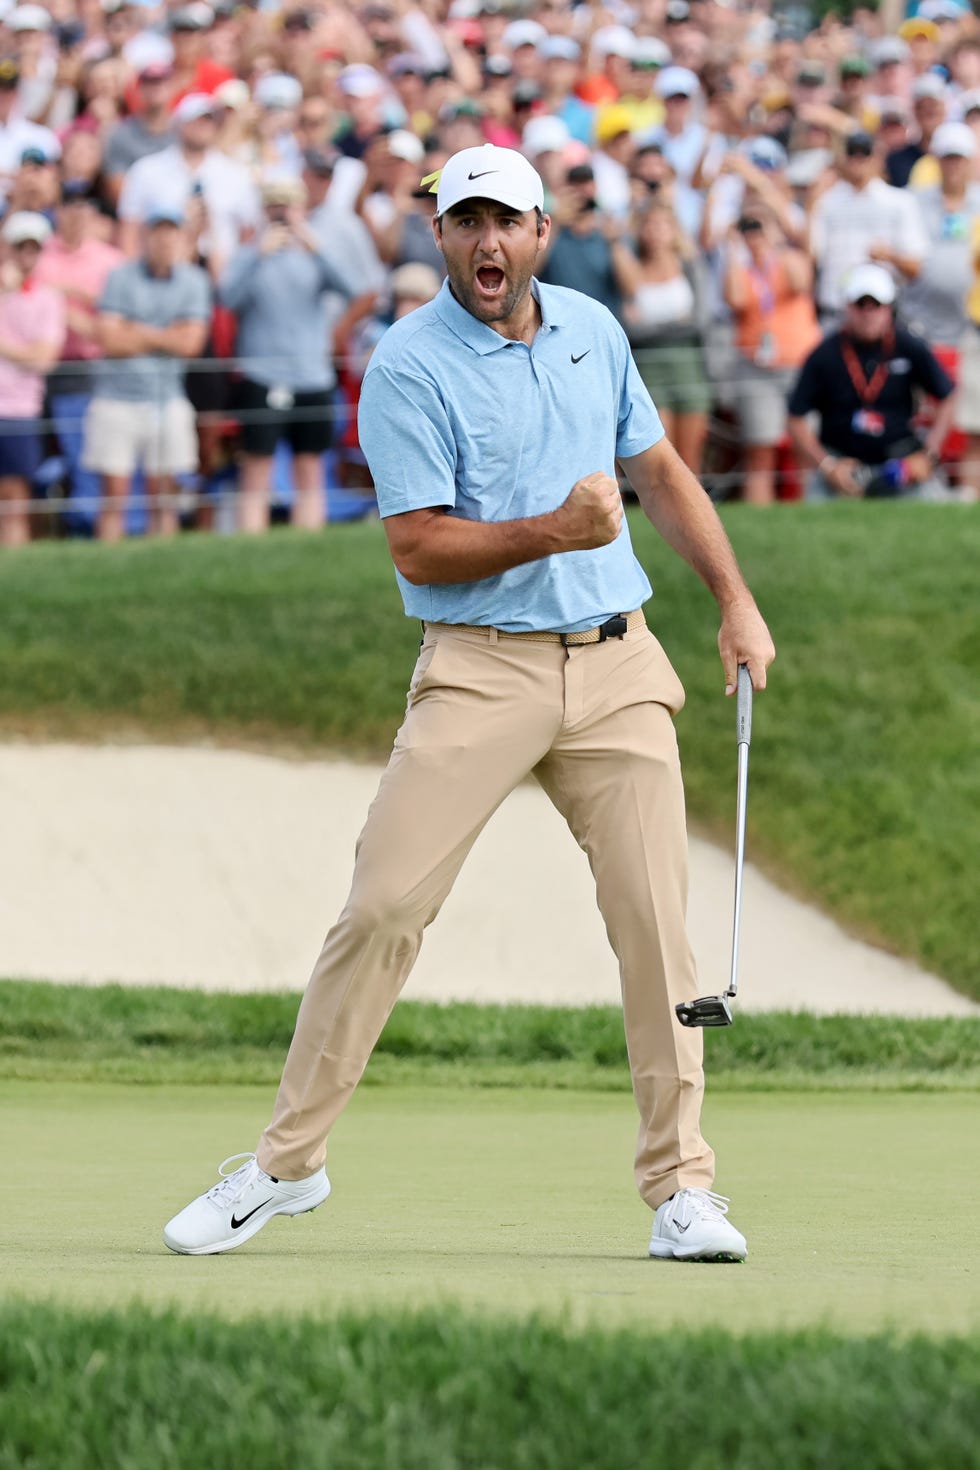 scottie scheffler doing a fist pump and celebrating while standing on a golf green